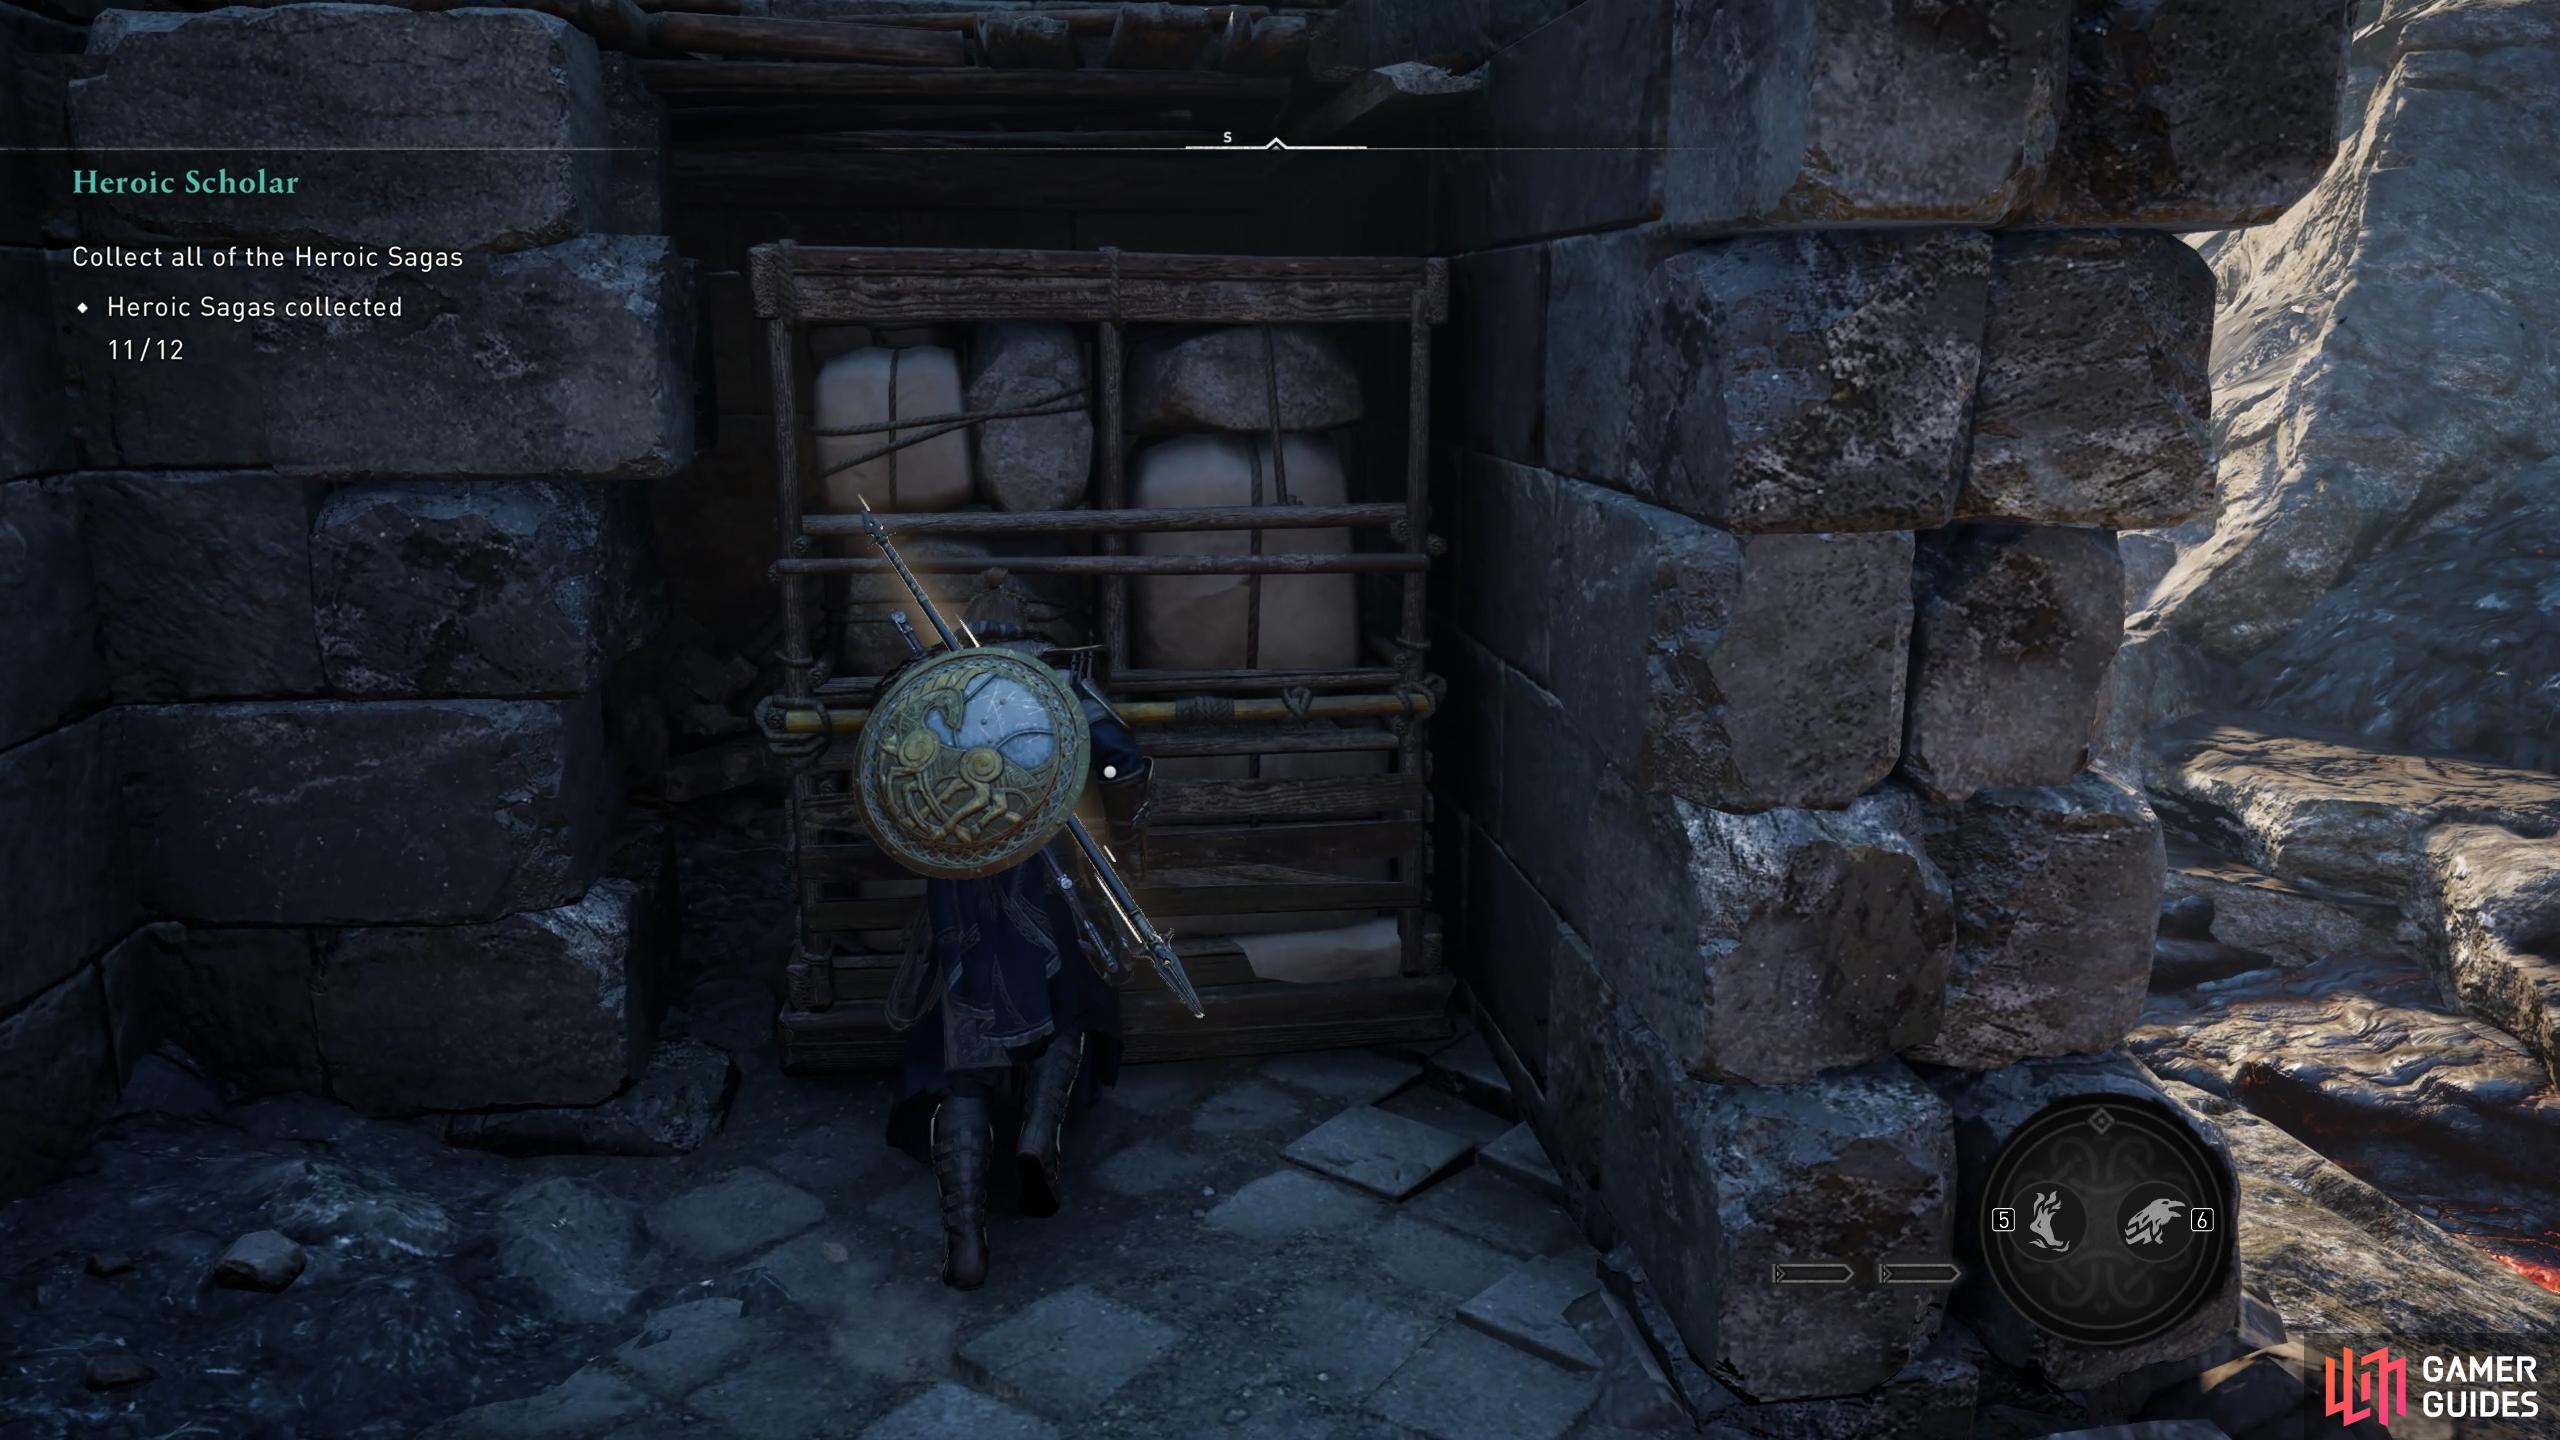 You can find a fire pot to destroy the front door behind this barricade in the stone ruins to the northwest.